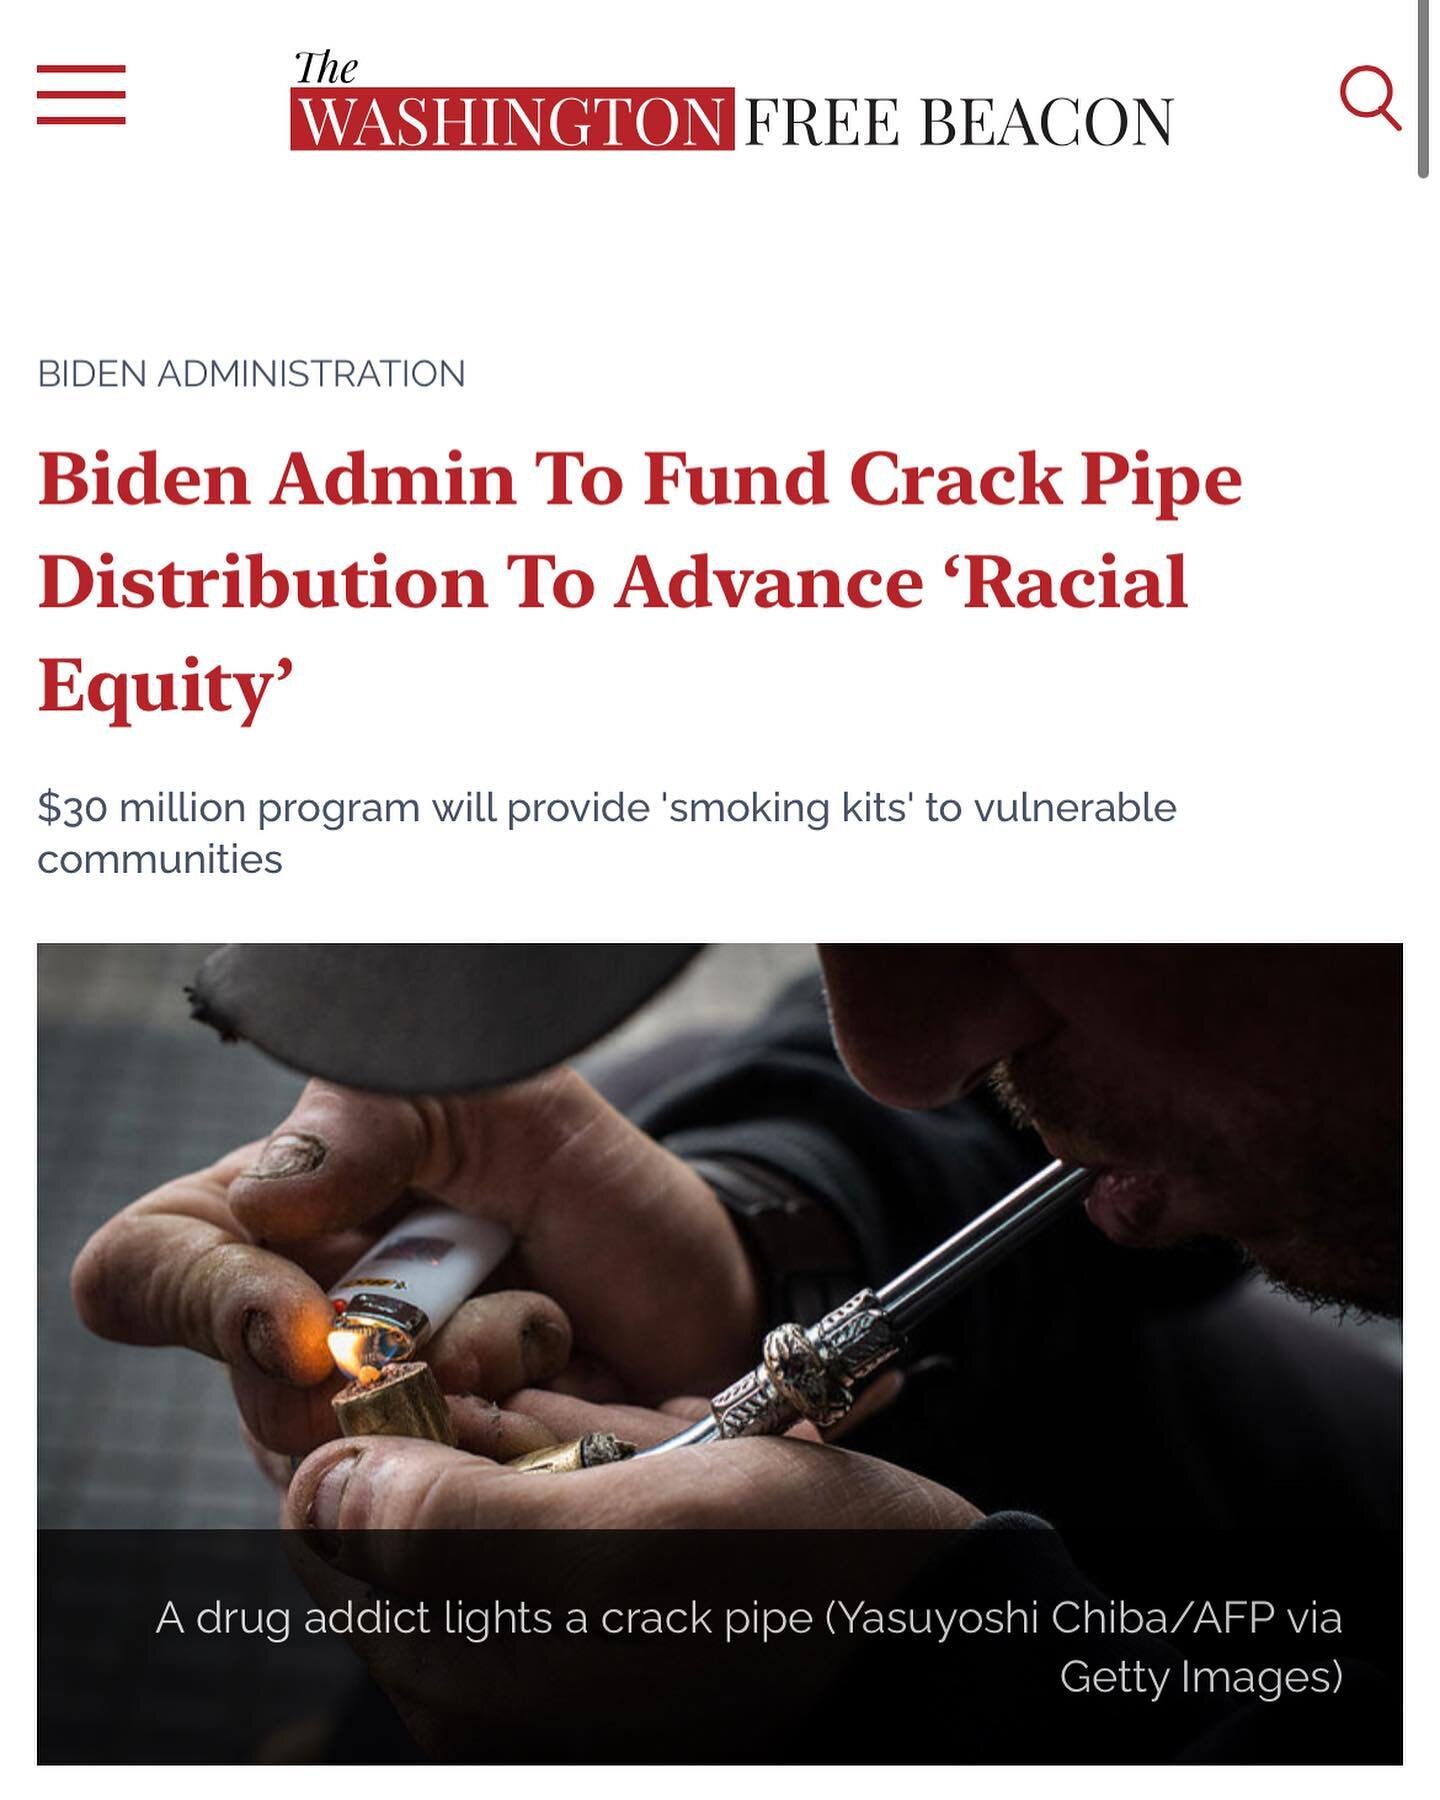 Don&rsquo;t listen to the naysayers, I can truly think of no better way to spend my tax dollars than to give crackheads upgraded crack pipes. If you ask me, it&rsquo;s systemic racism that allows white people to have nice crack pipes. I&rsquo;m glad 